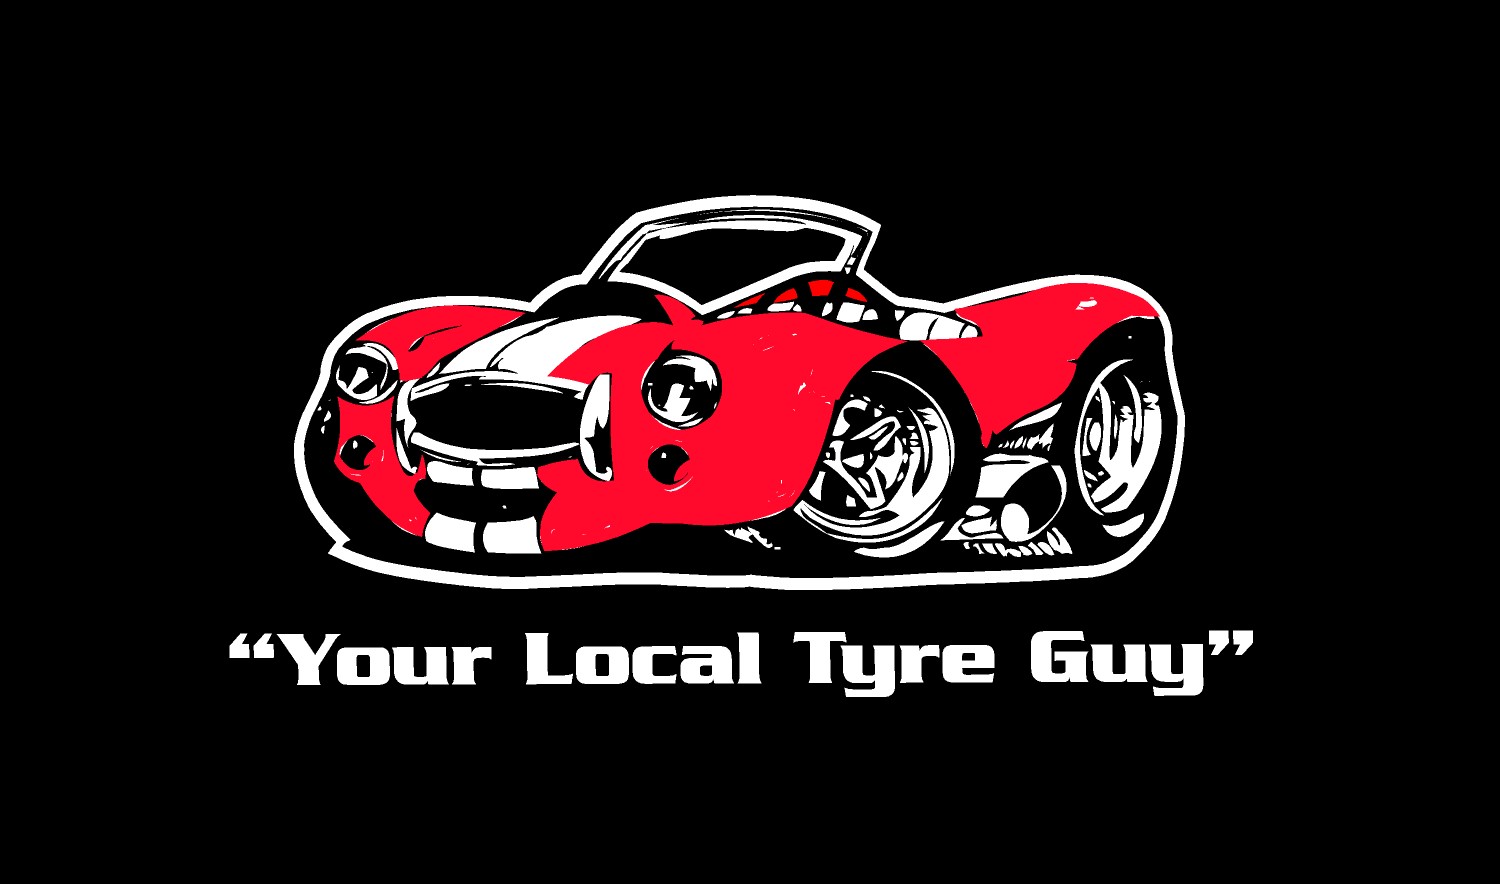 Your Local Tyre Guy